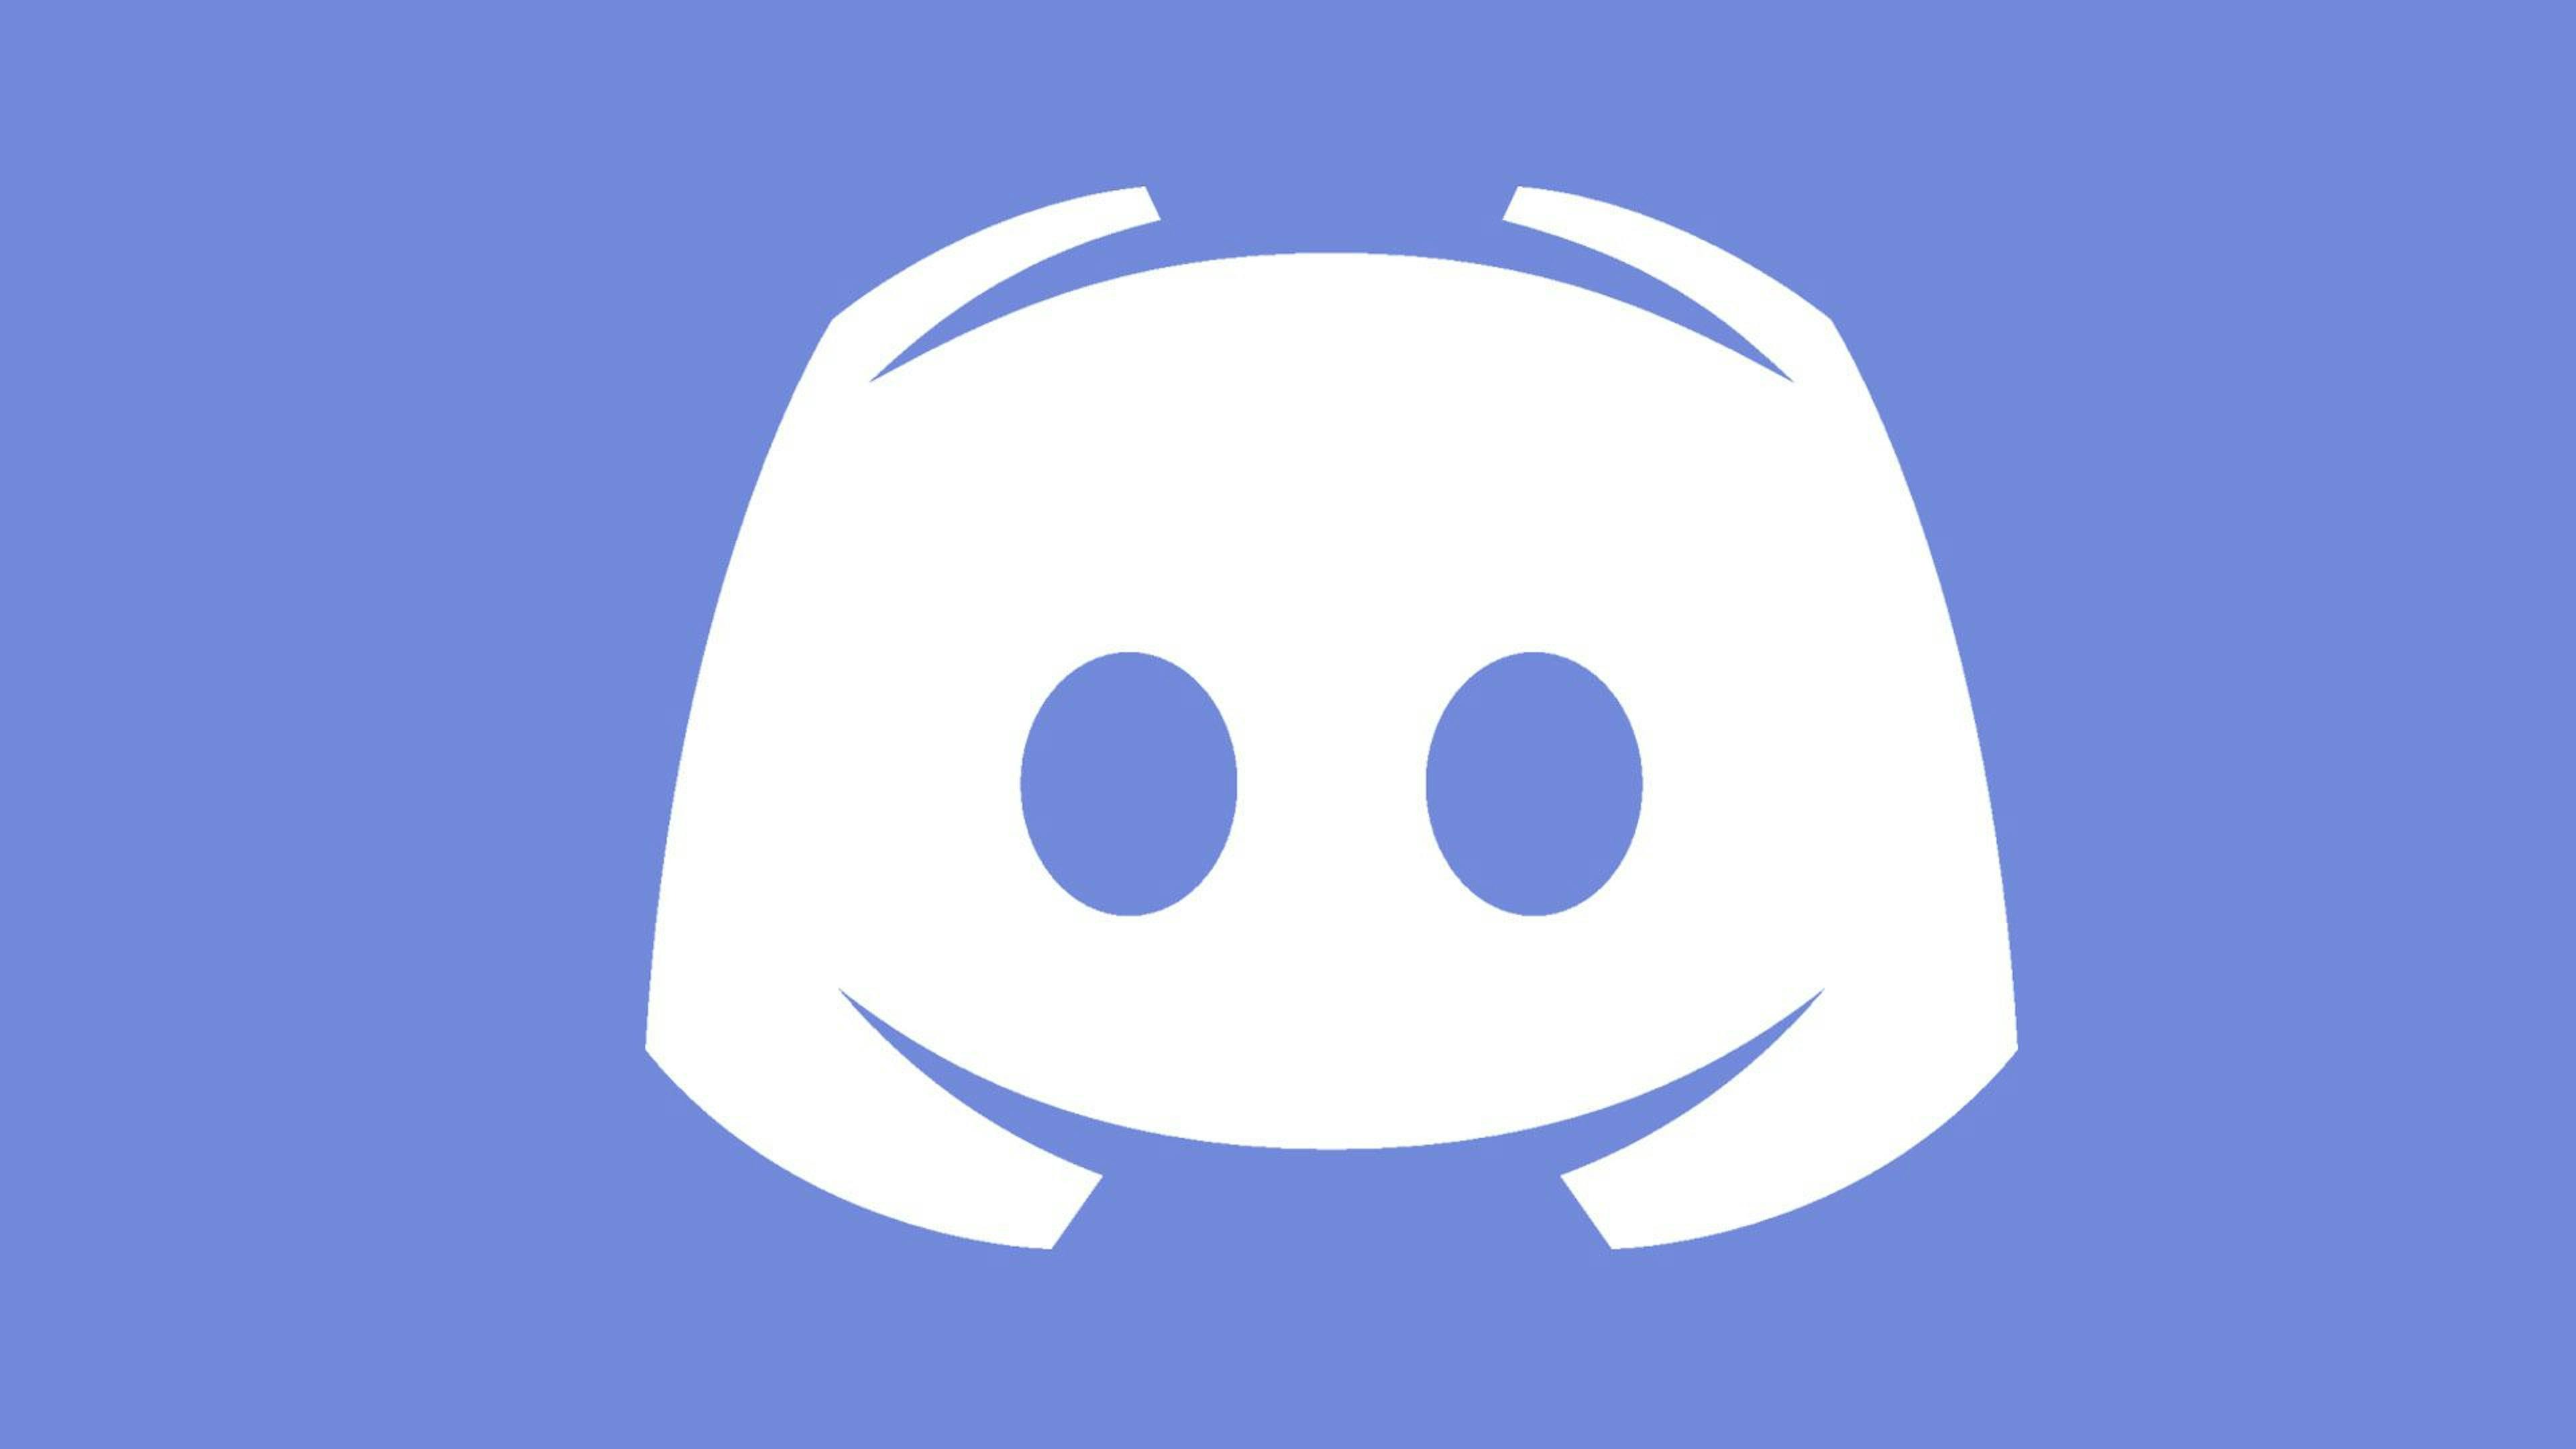 featured image - PlayStation Discord Partnership Announced 